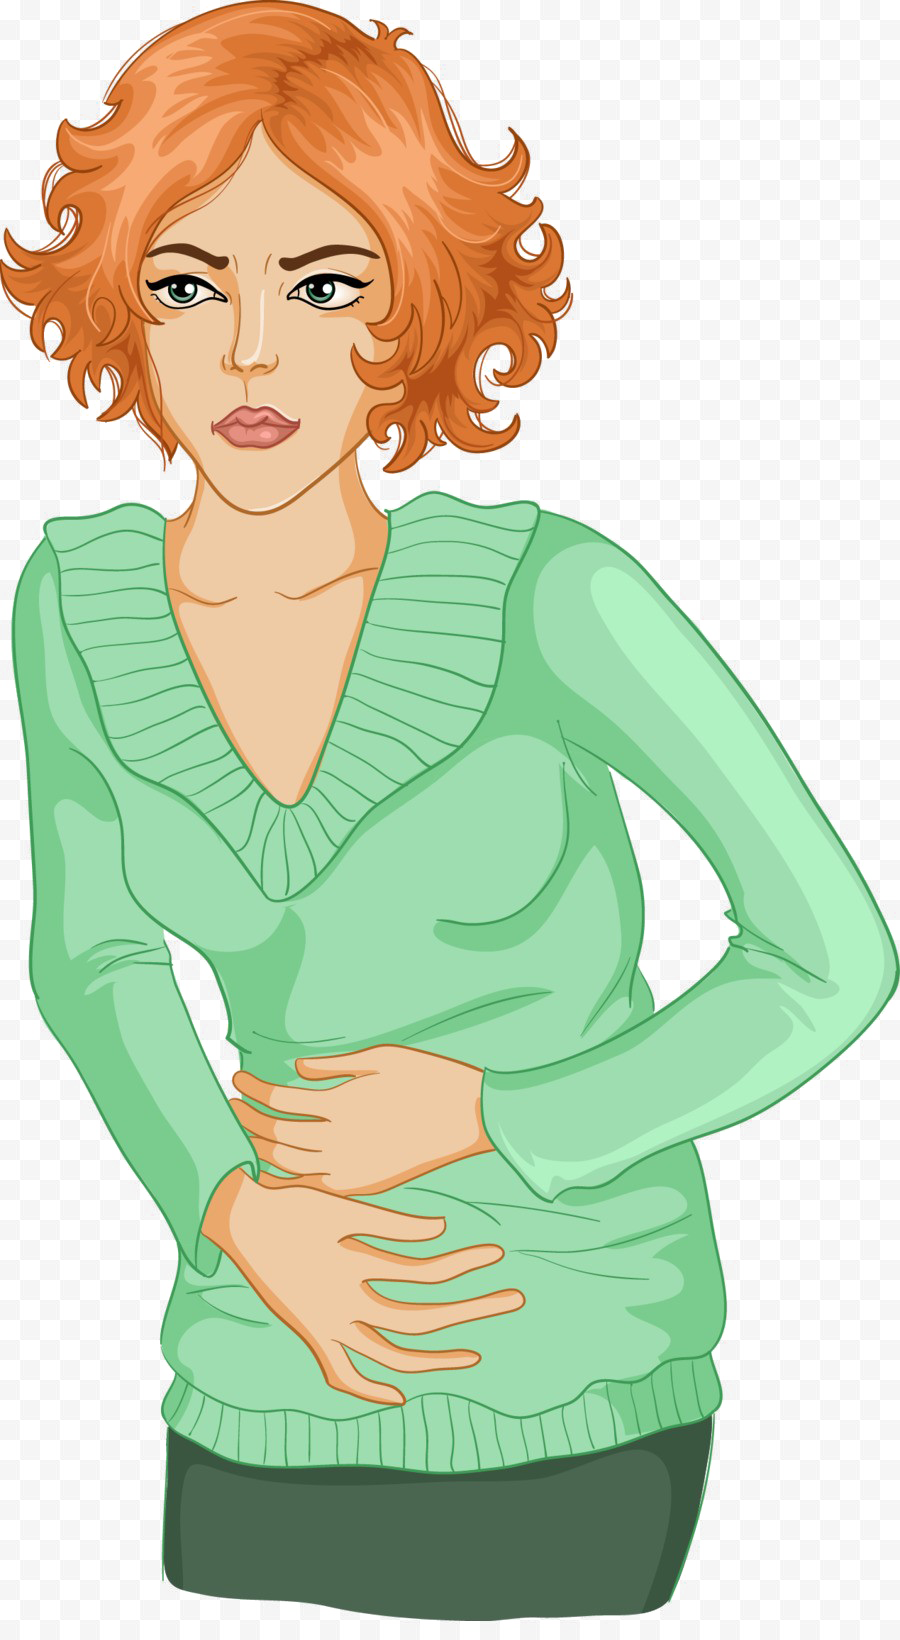 Download PNG image - Pain In Stomach Transparent Background 